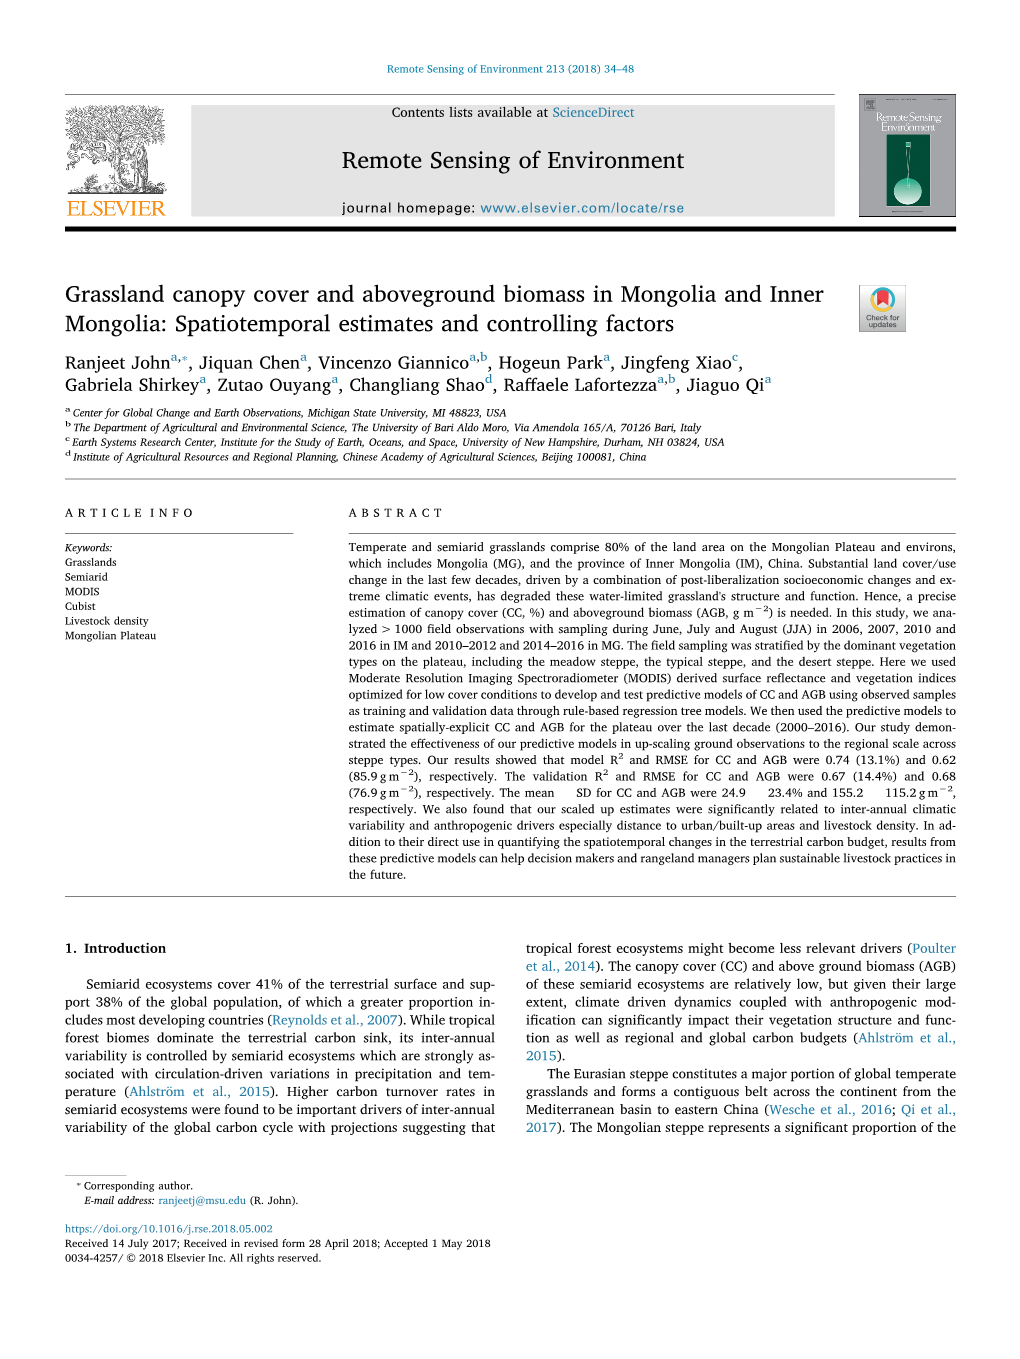 Grassland Canopy Cover and Aboveground Biomass in Mongolia